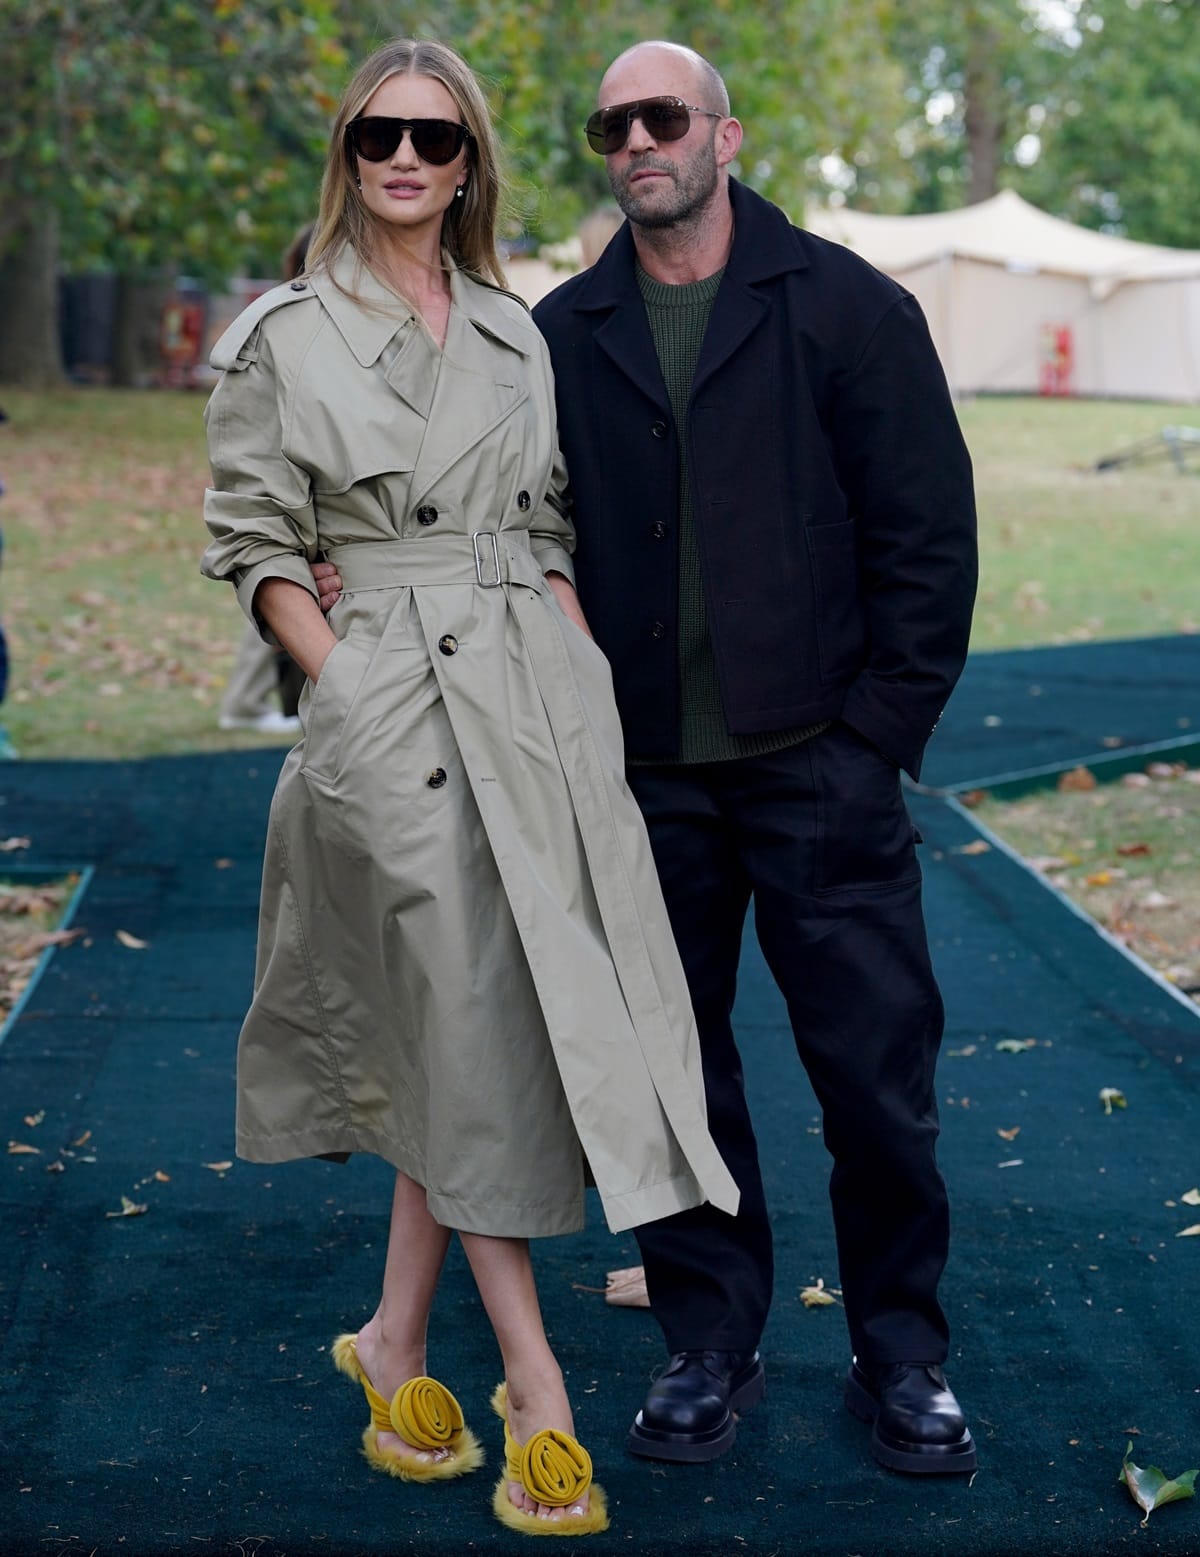 At the Burberry show during London Fashion Week in September 2023, Rosie Huntington-Whiteley, standing at 5ft 9 (175.3 cm), was slightly taller than Jason Statham, who measures 5ft 8 ¾ (174.6 cm)